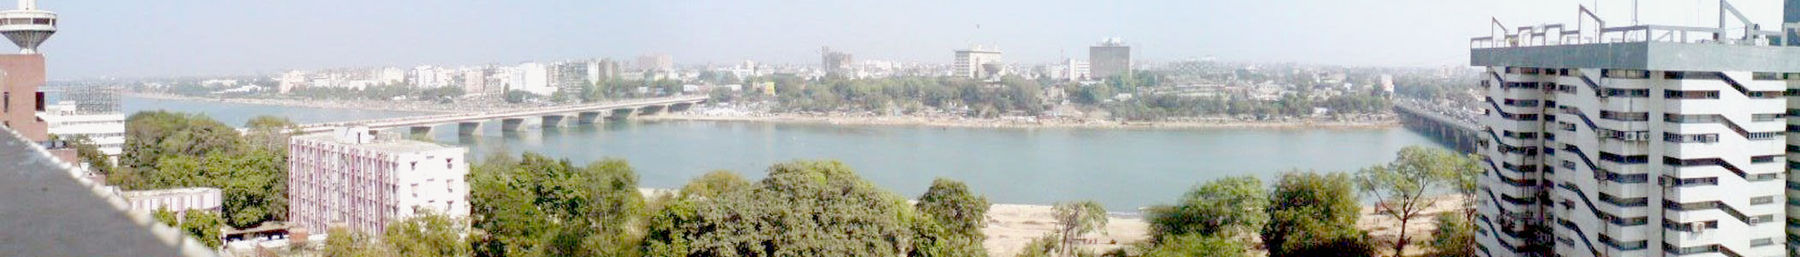 Ahmedabad banner for Wikivoyage.jpg